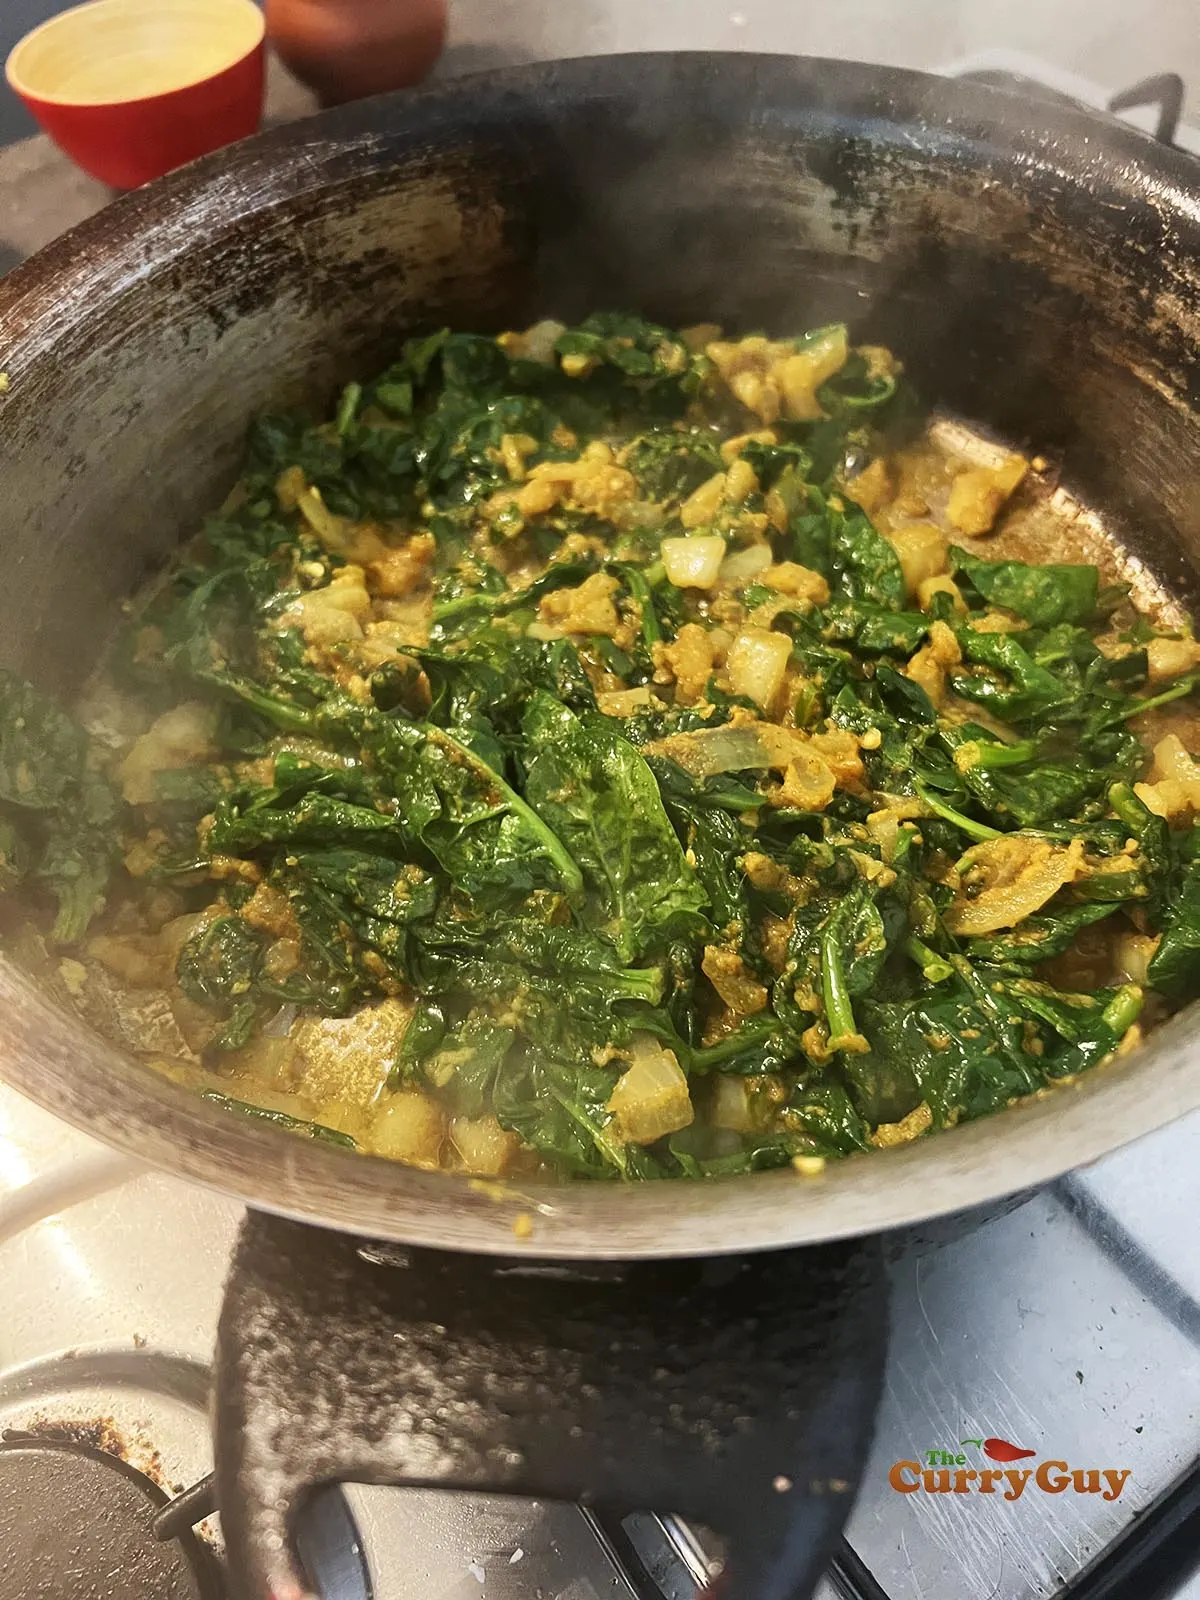 Spinach cooking in the pan